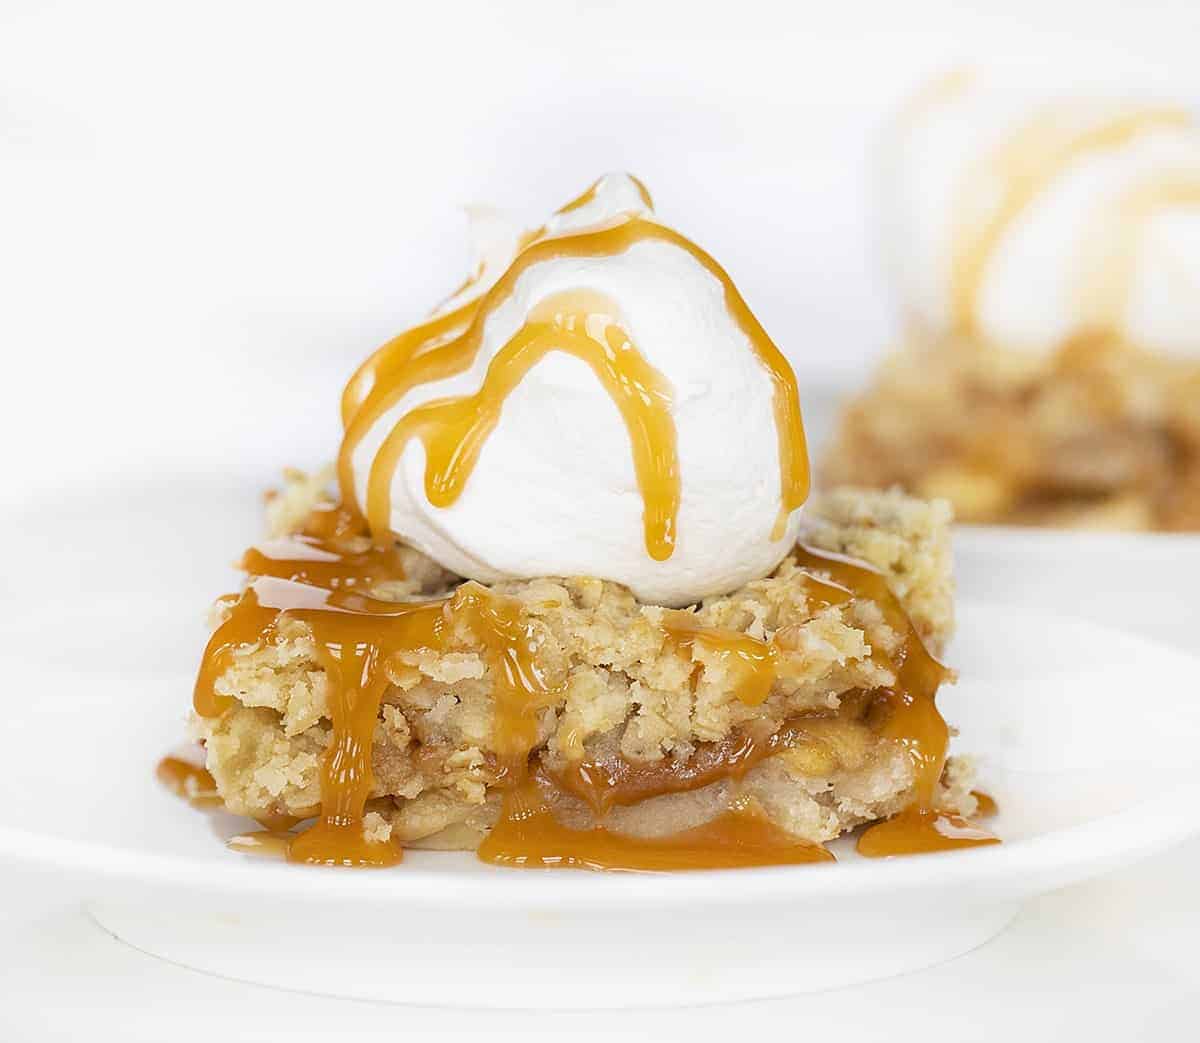 One Piece of Oatmeal Caramel Apple Bar on White Plate with Whipped Cream and Caramel